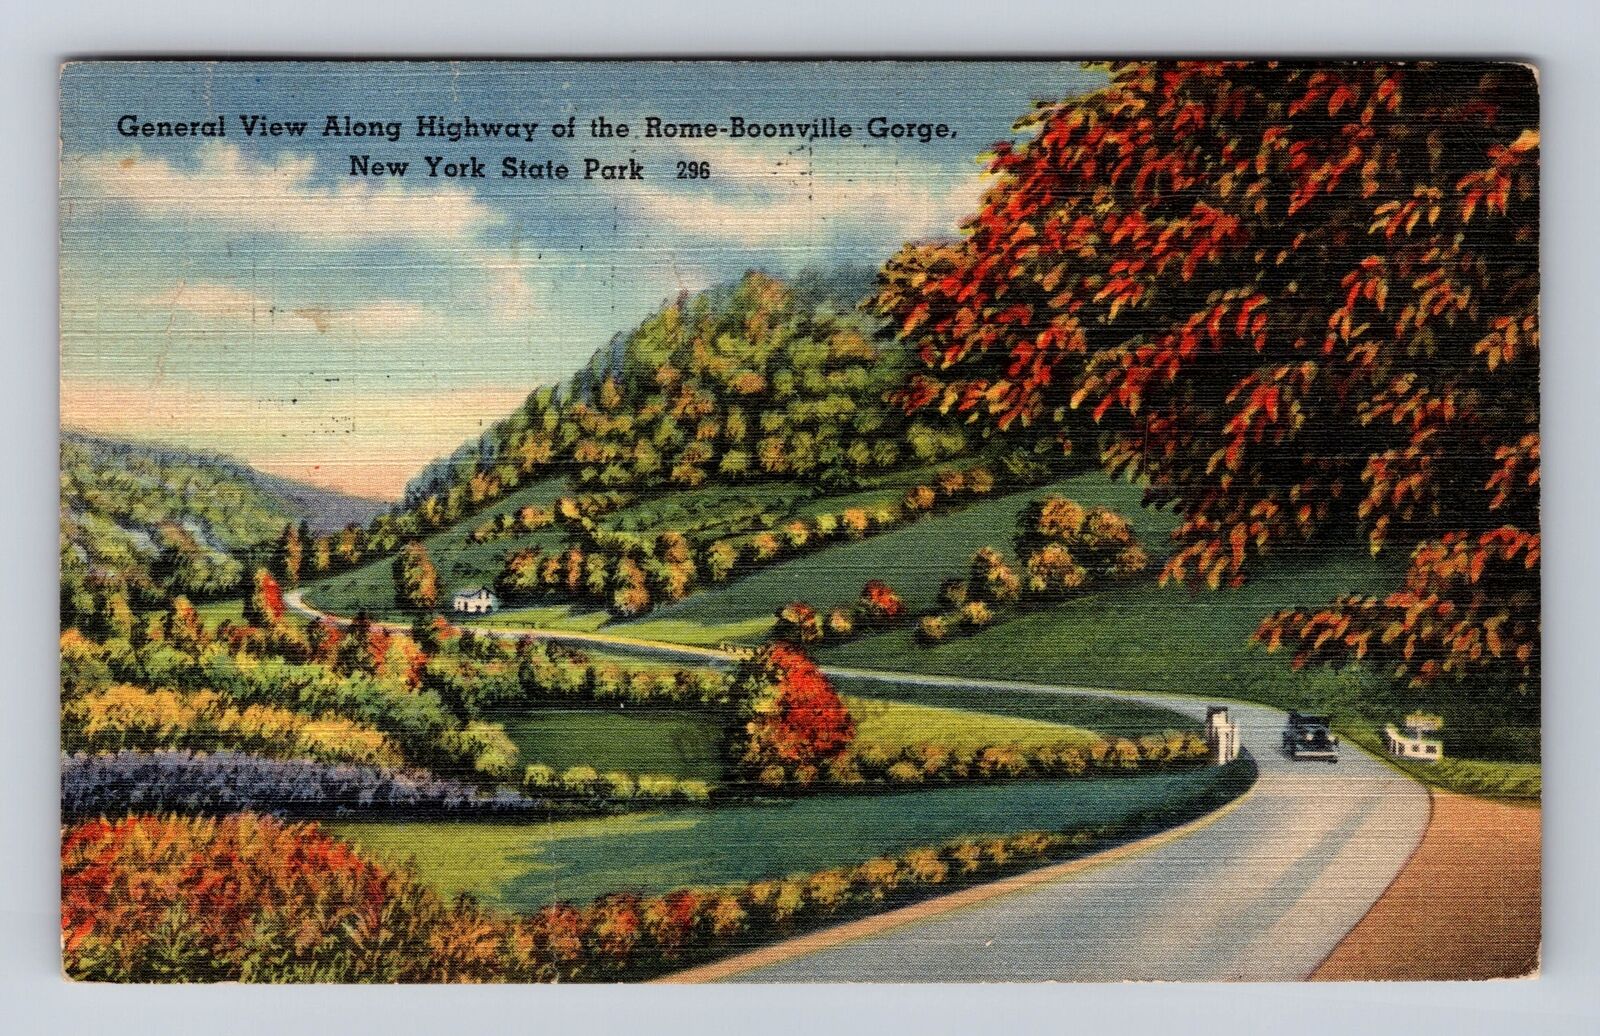 Rome NY-New York, Along Highway Rome Boonville Gorge, Vintage c1954 Postcard